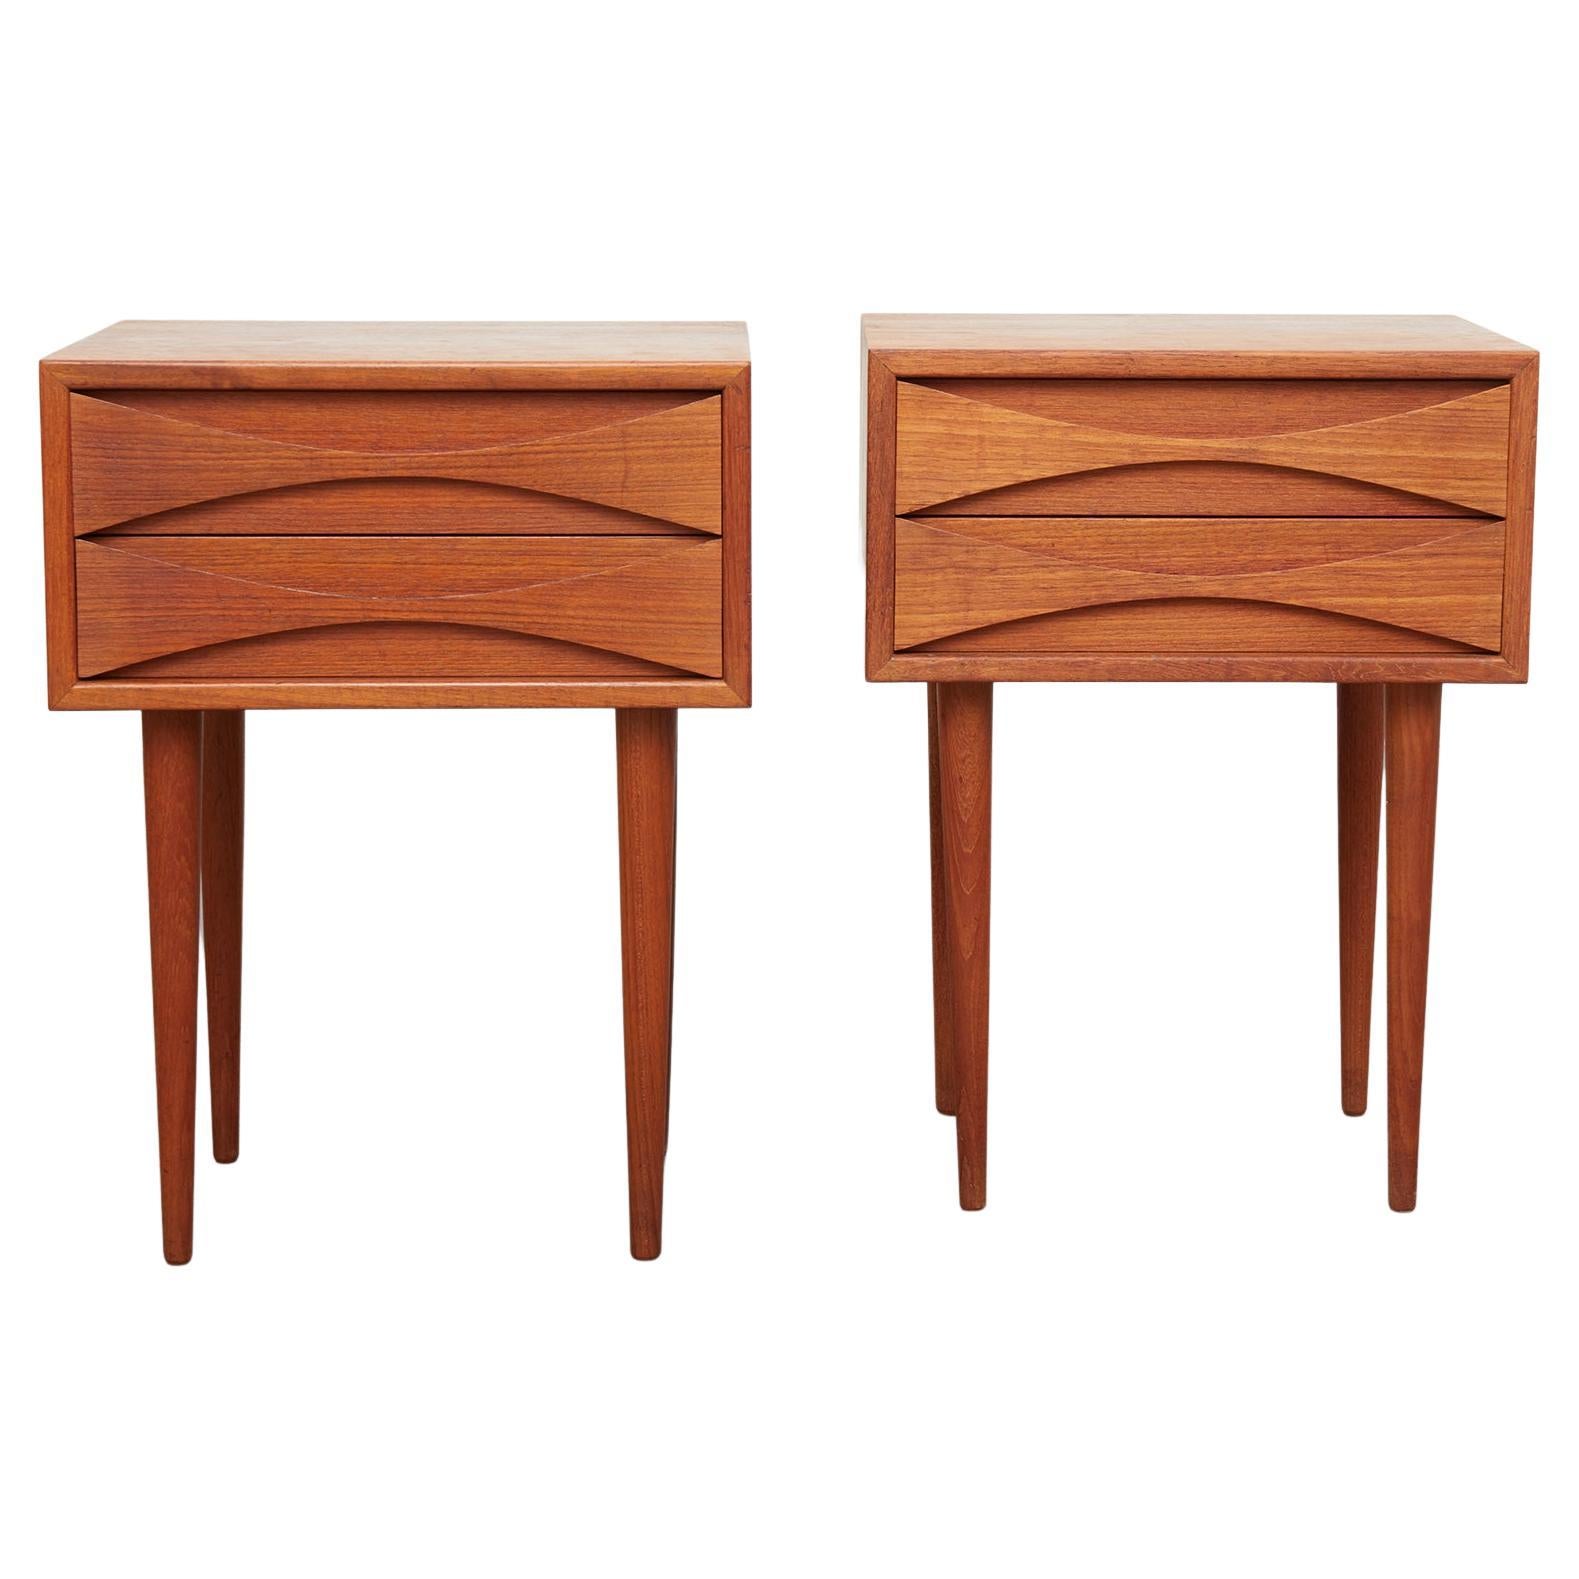 Pair of Teak Bedside Tables by Niels Clausen, NC Mobler 1960